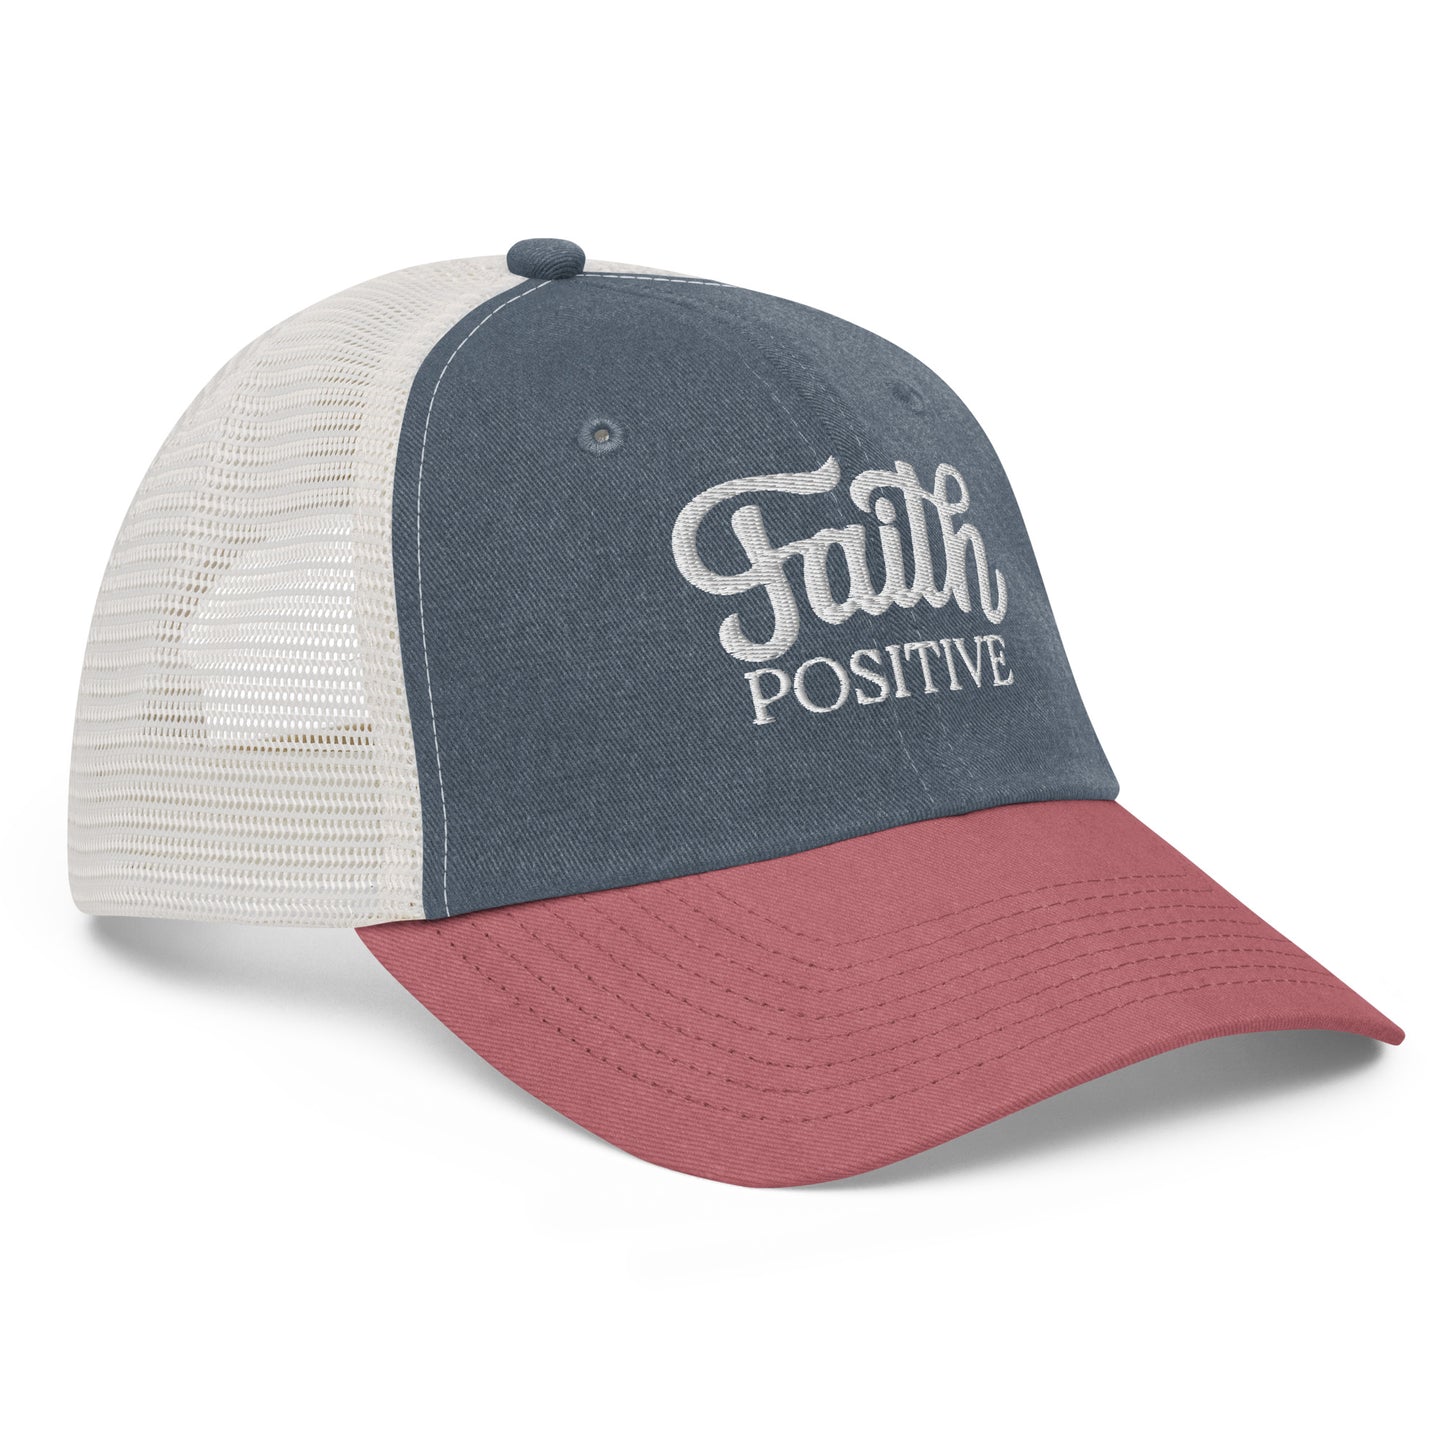 This is the Faith Positive low profile hat side view. The Faith Positive logo is embroidered on the front with white thread. This hat is pigment dyed, it has a mesh back, blue front and a red bill.